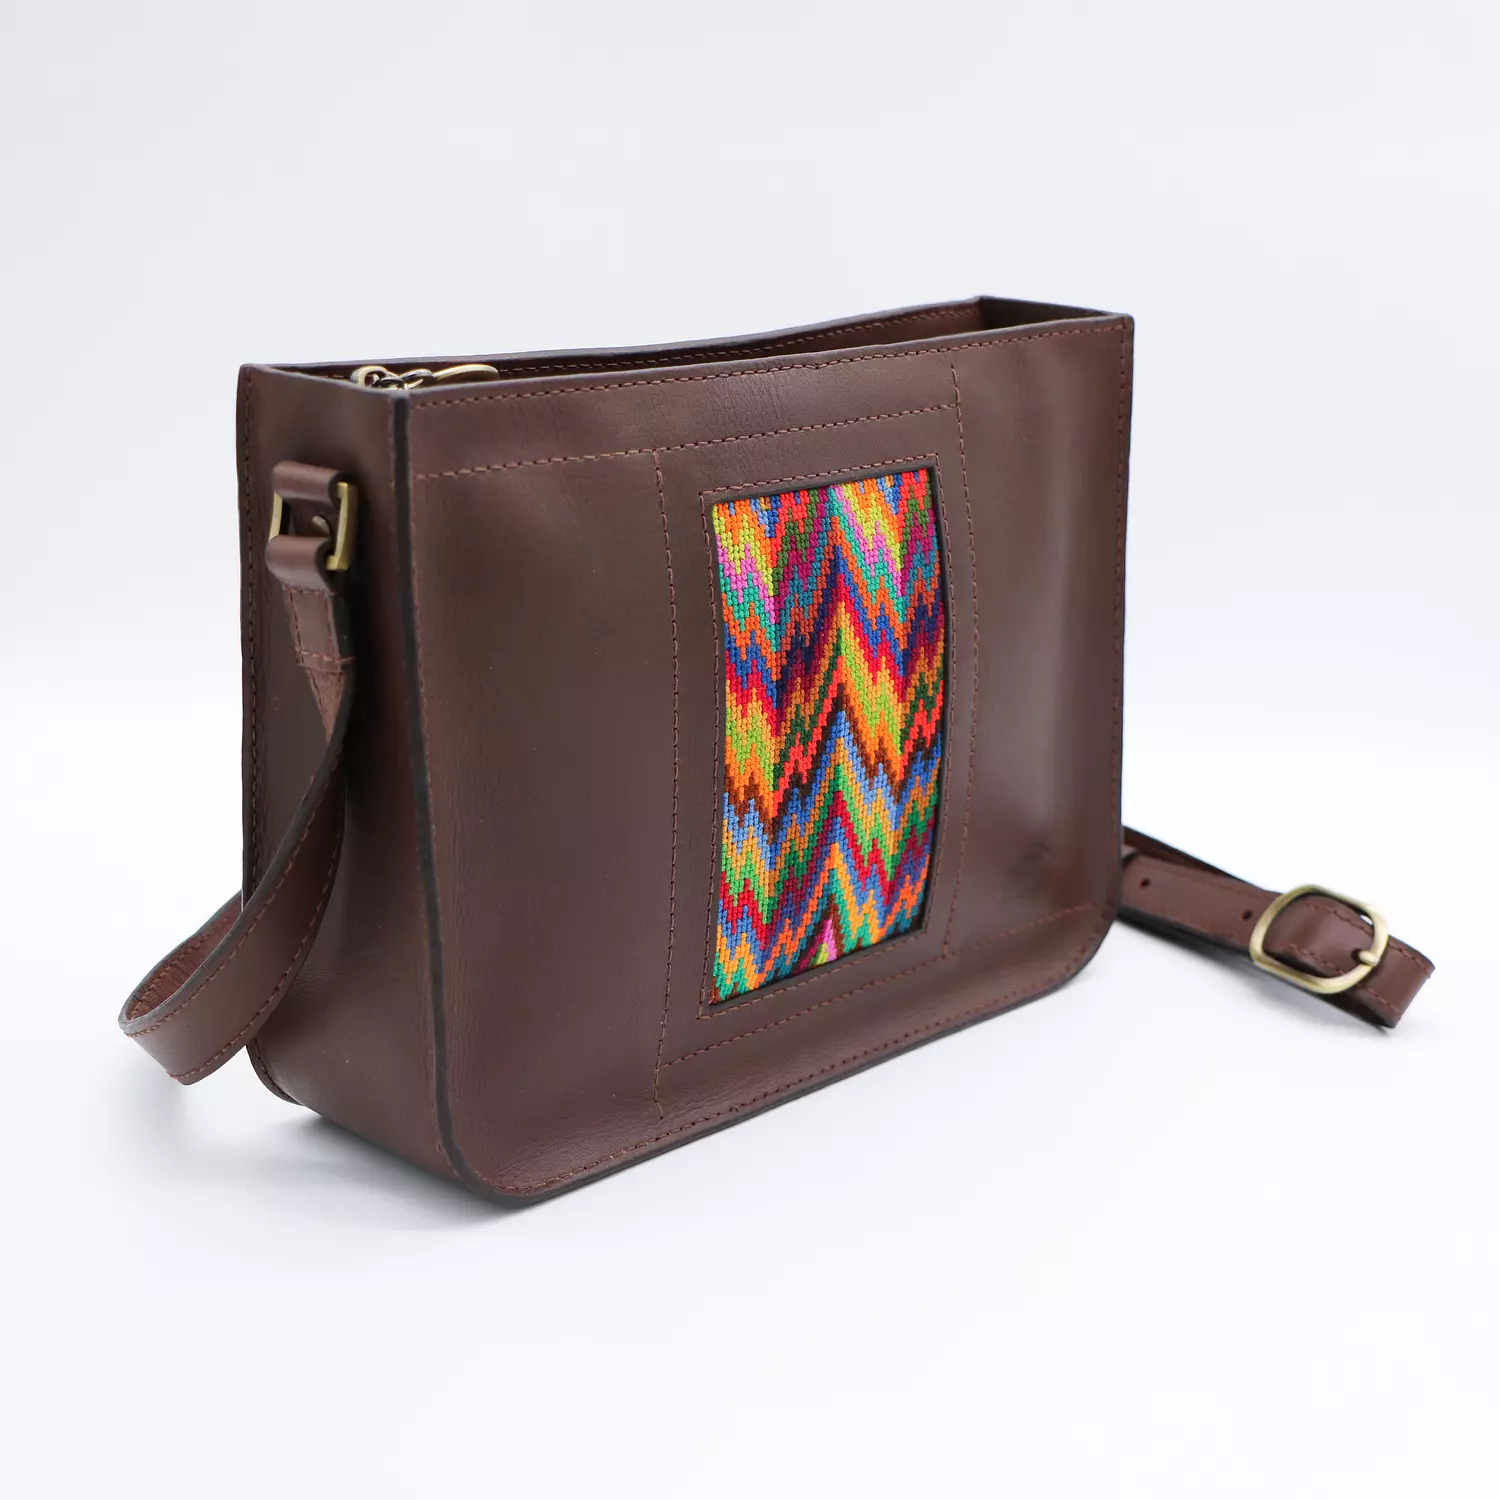 Genuine leather bag with colorful Cross stitching. 1